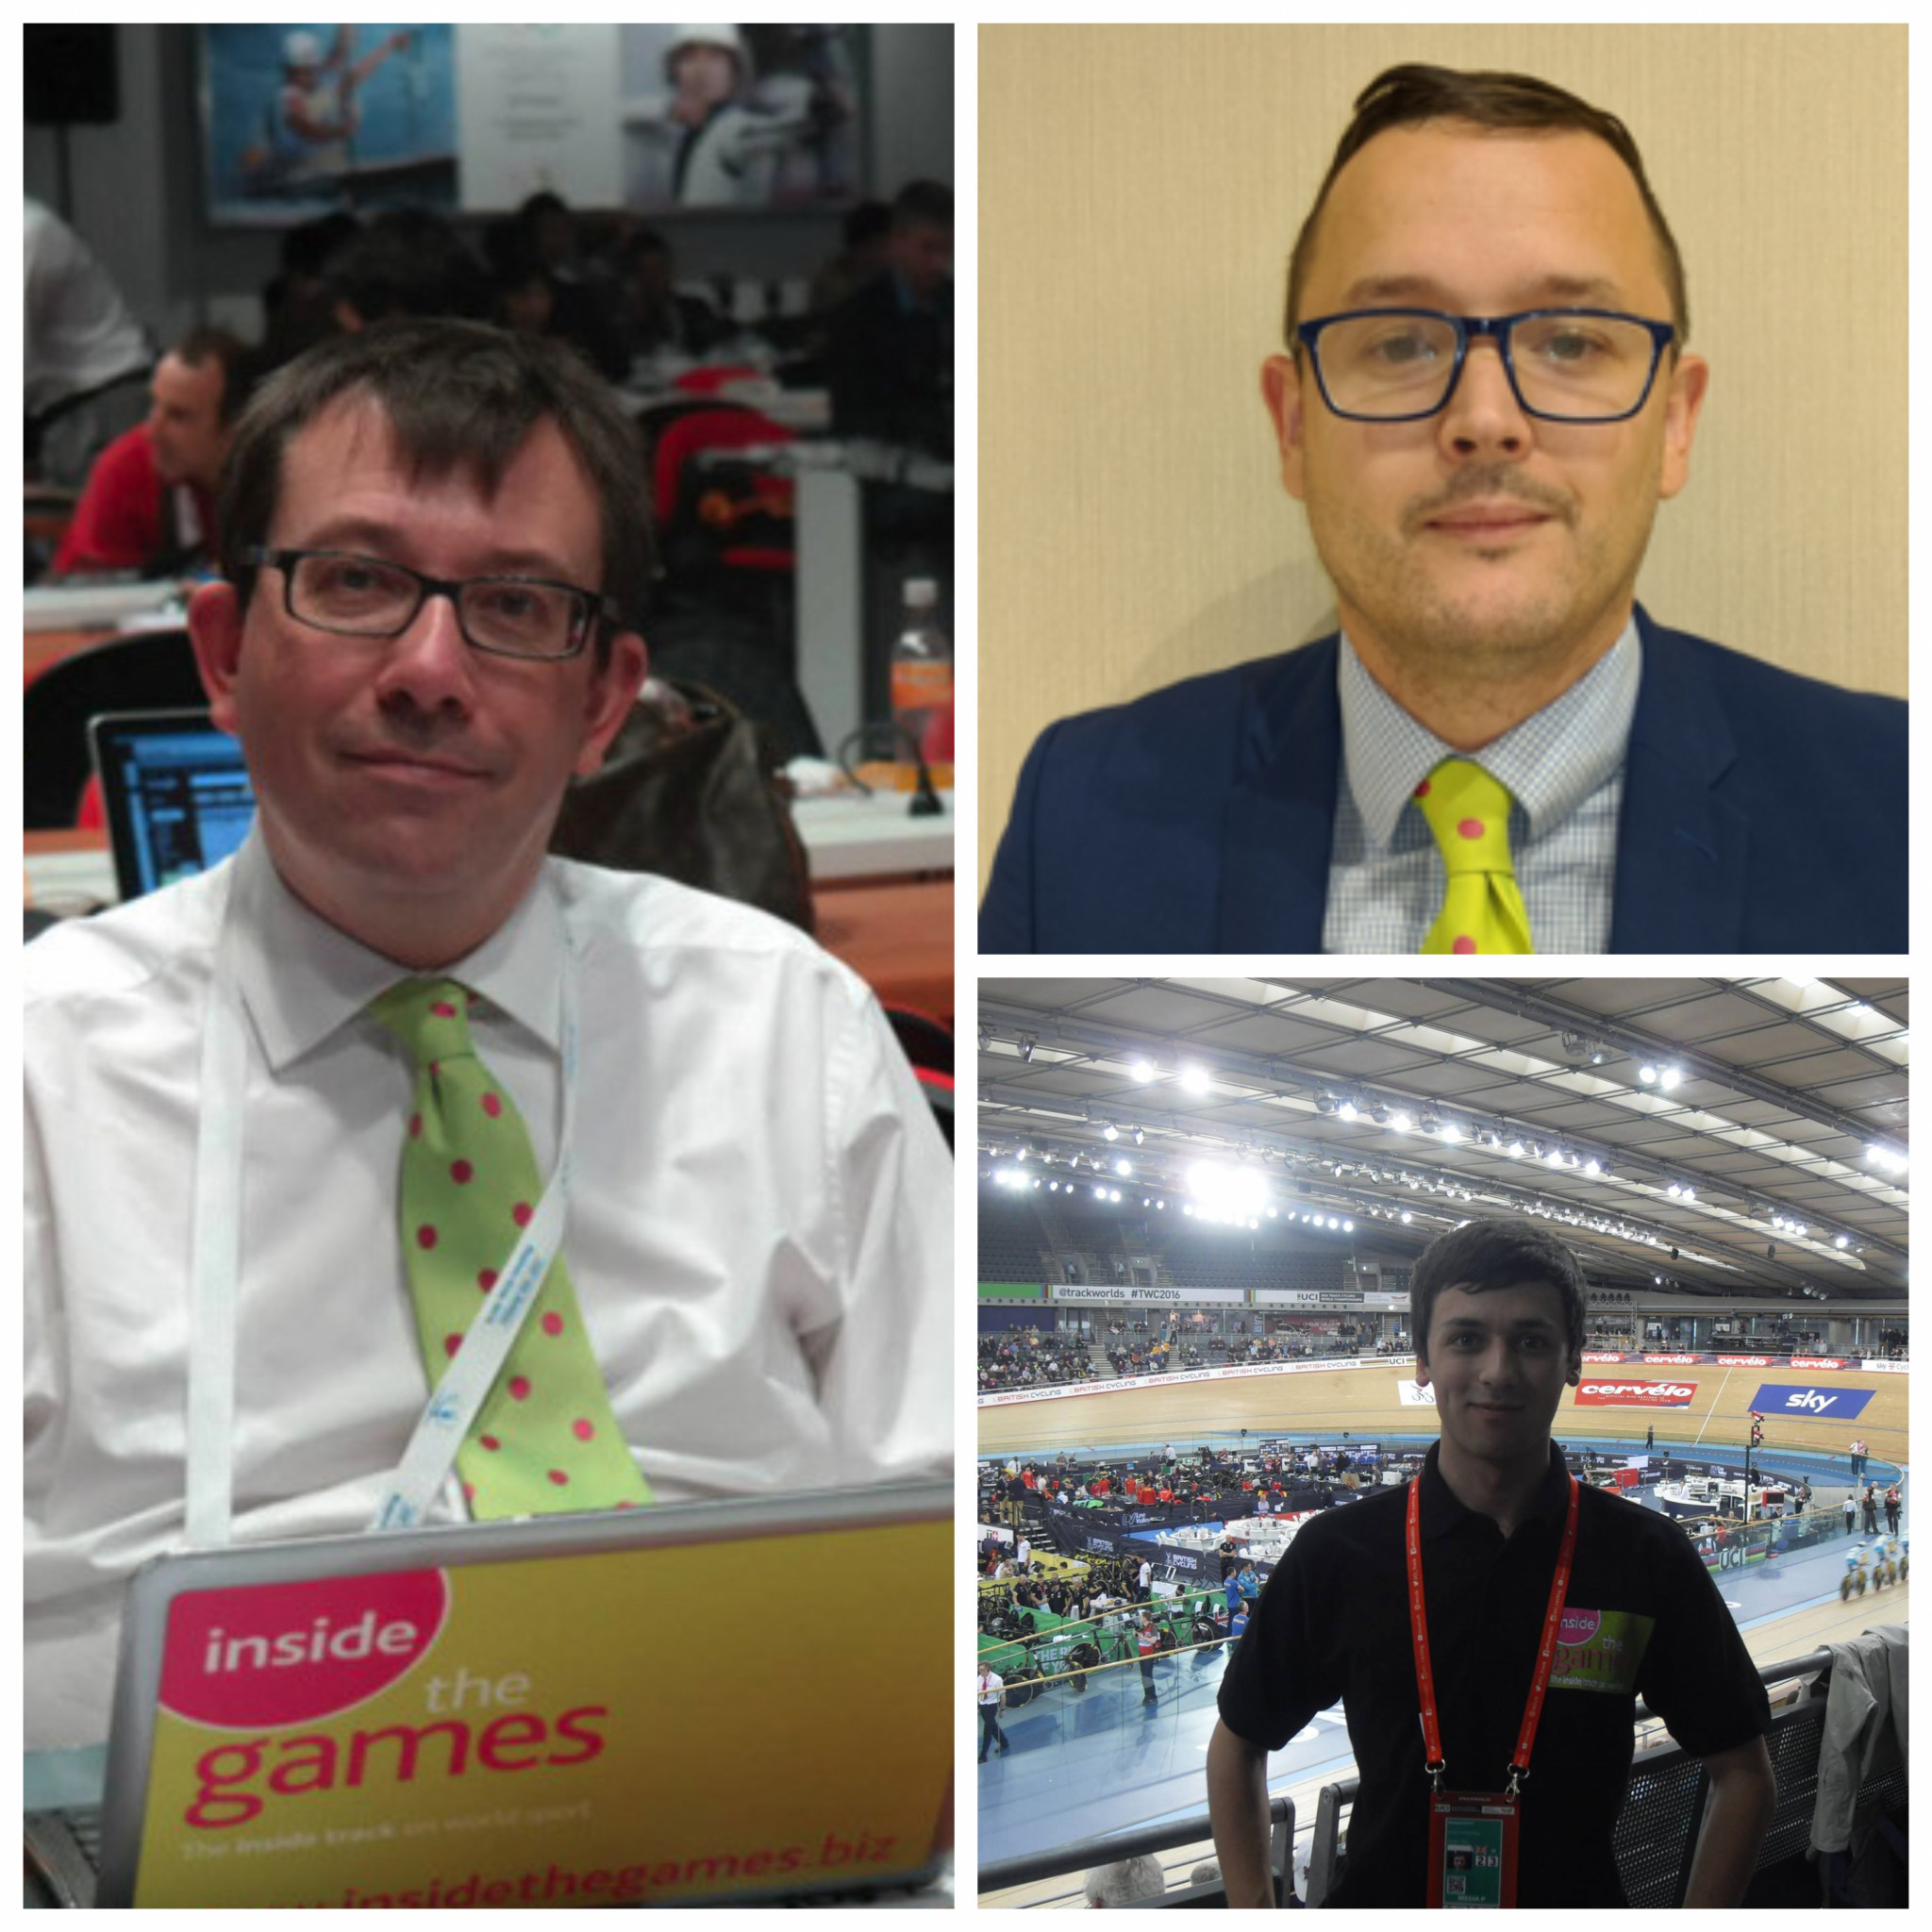 Three insidethegames journalists nominated for 2022 AIPS Awards